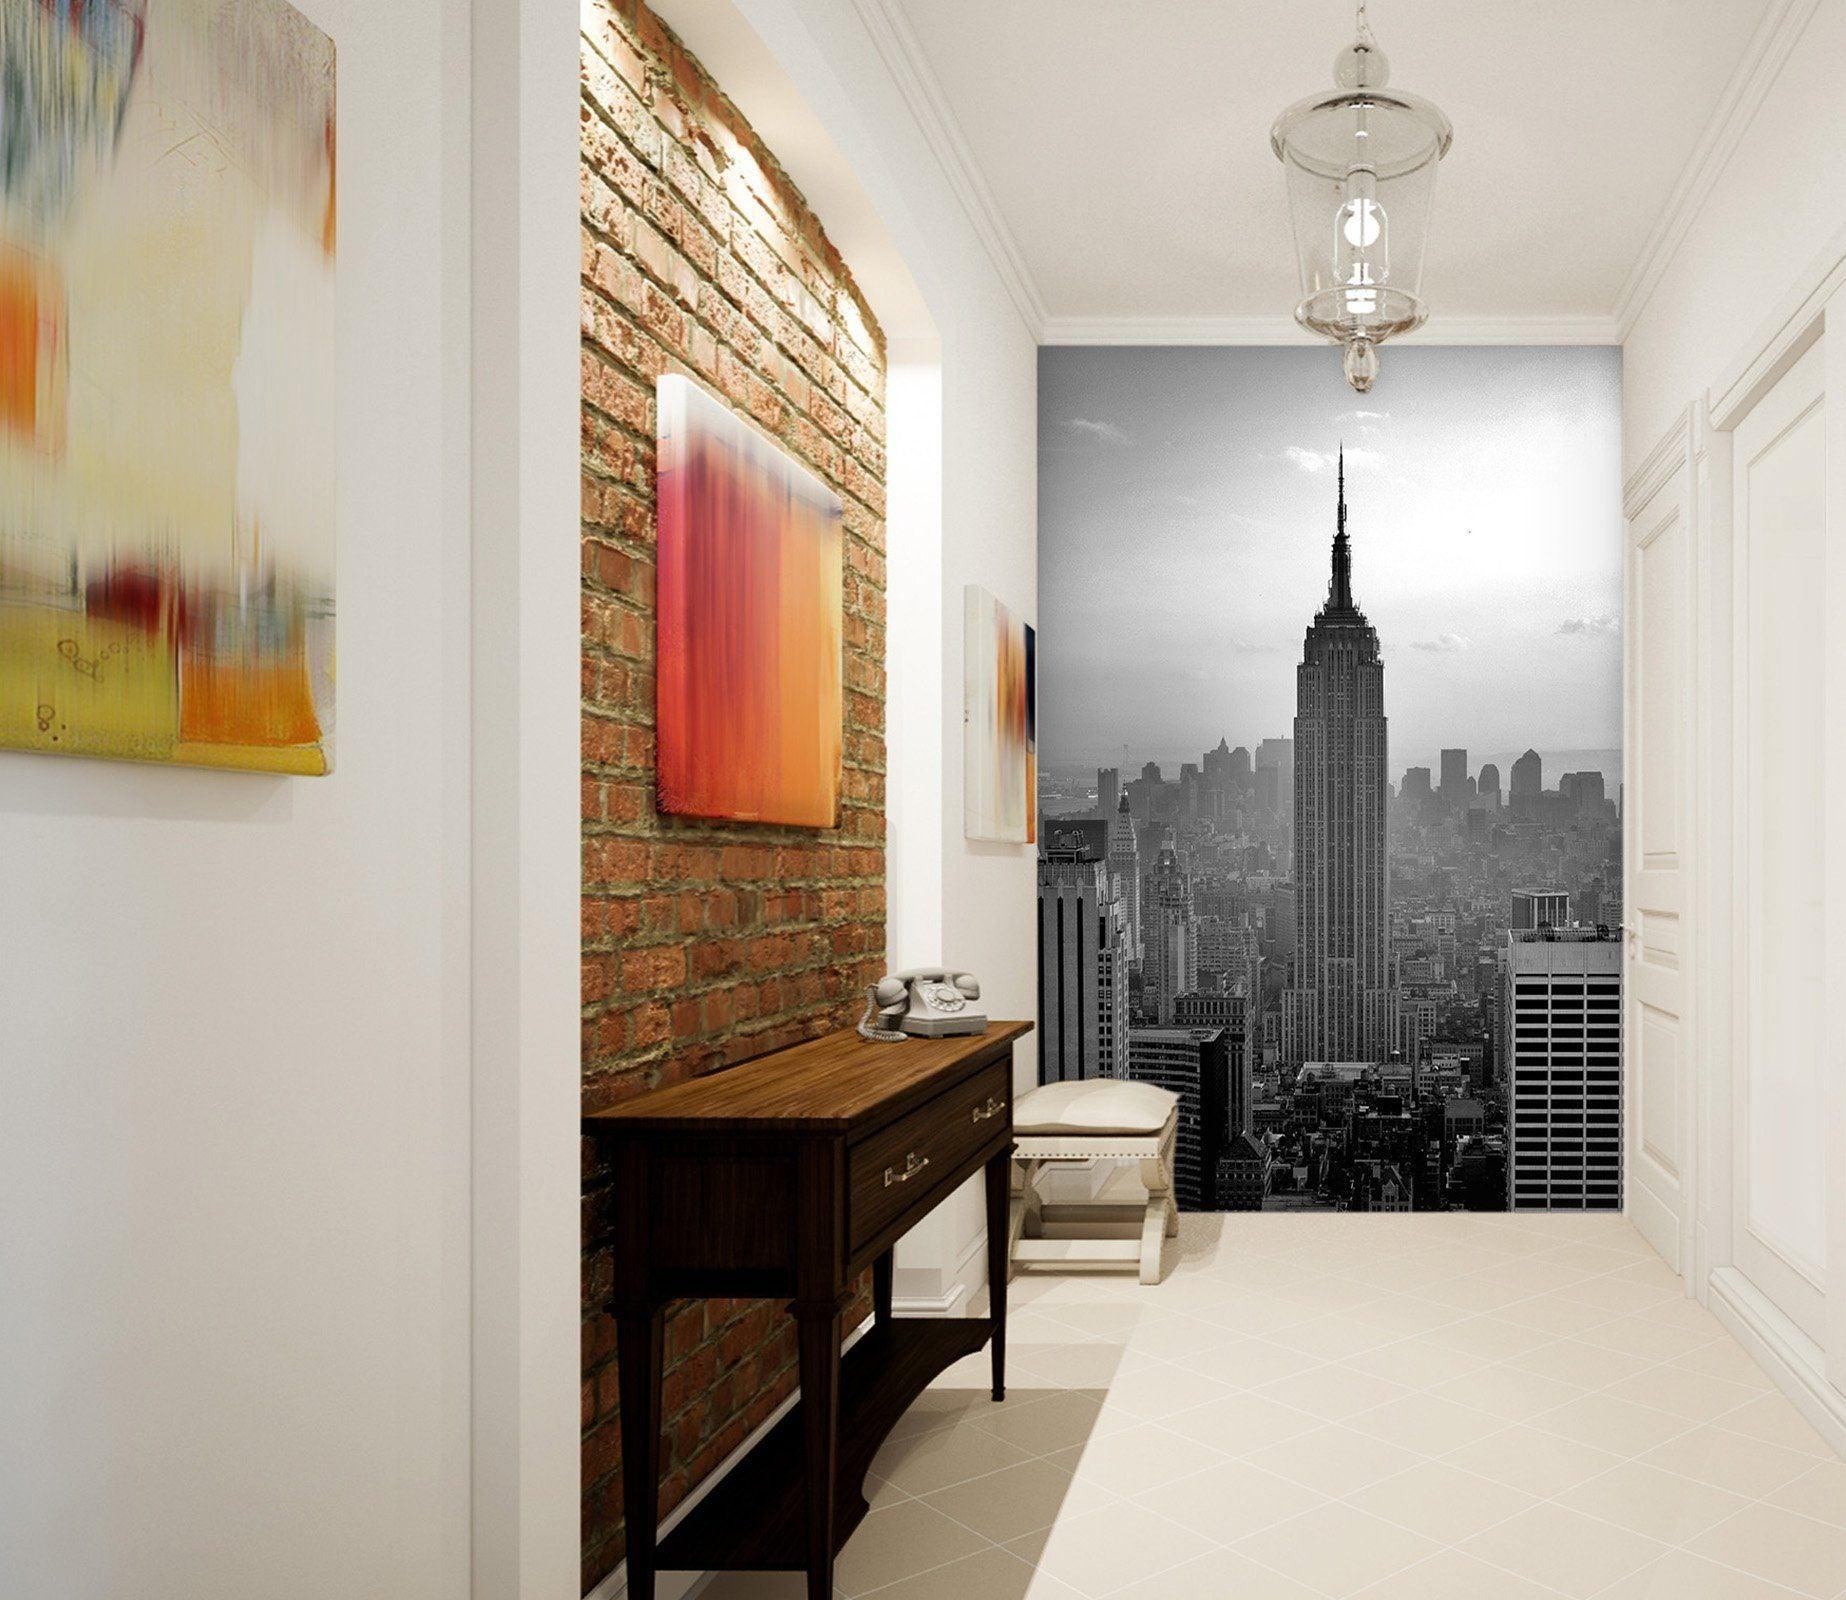 3D black and white city 113 wall murals- Jess Art Decoration